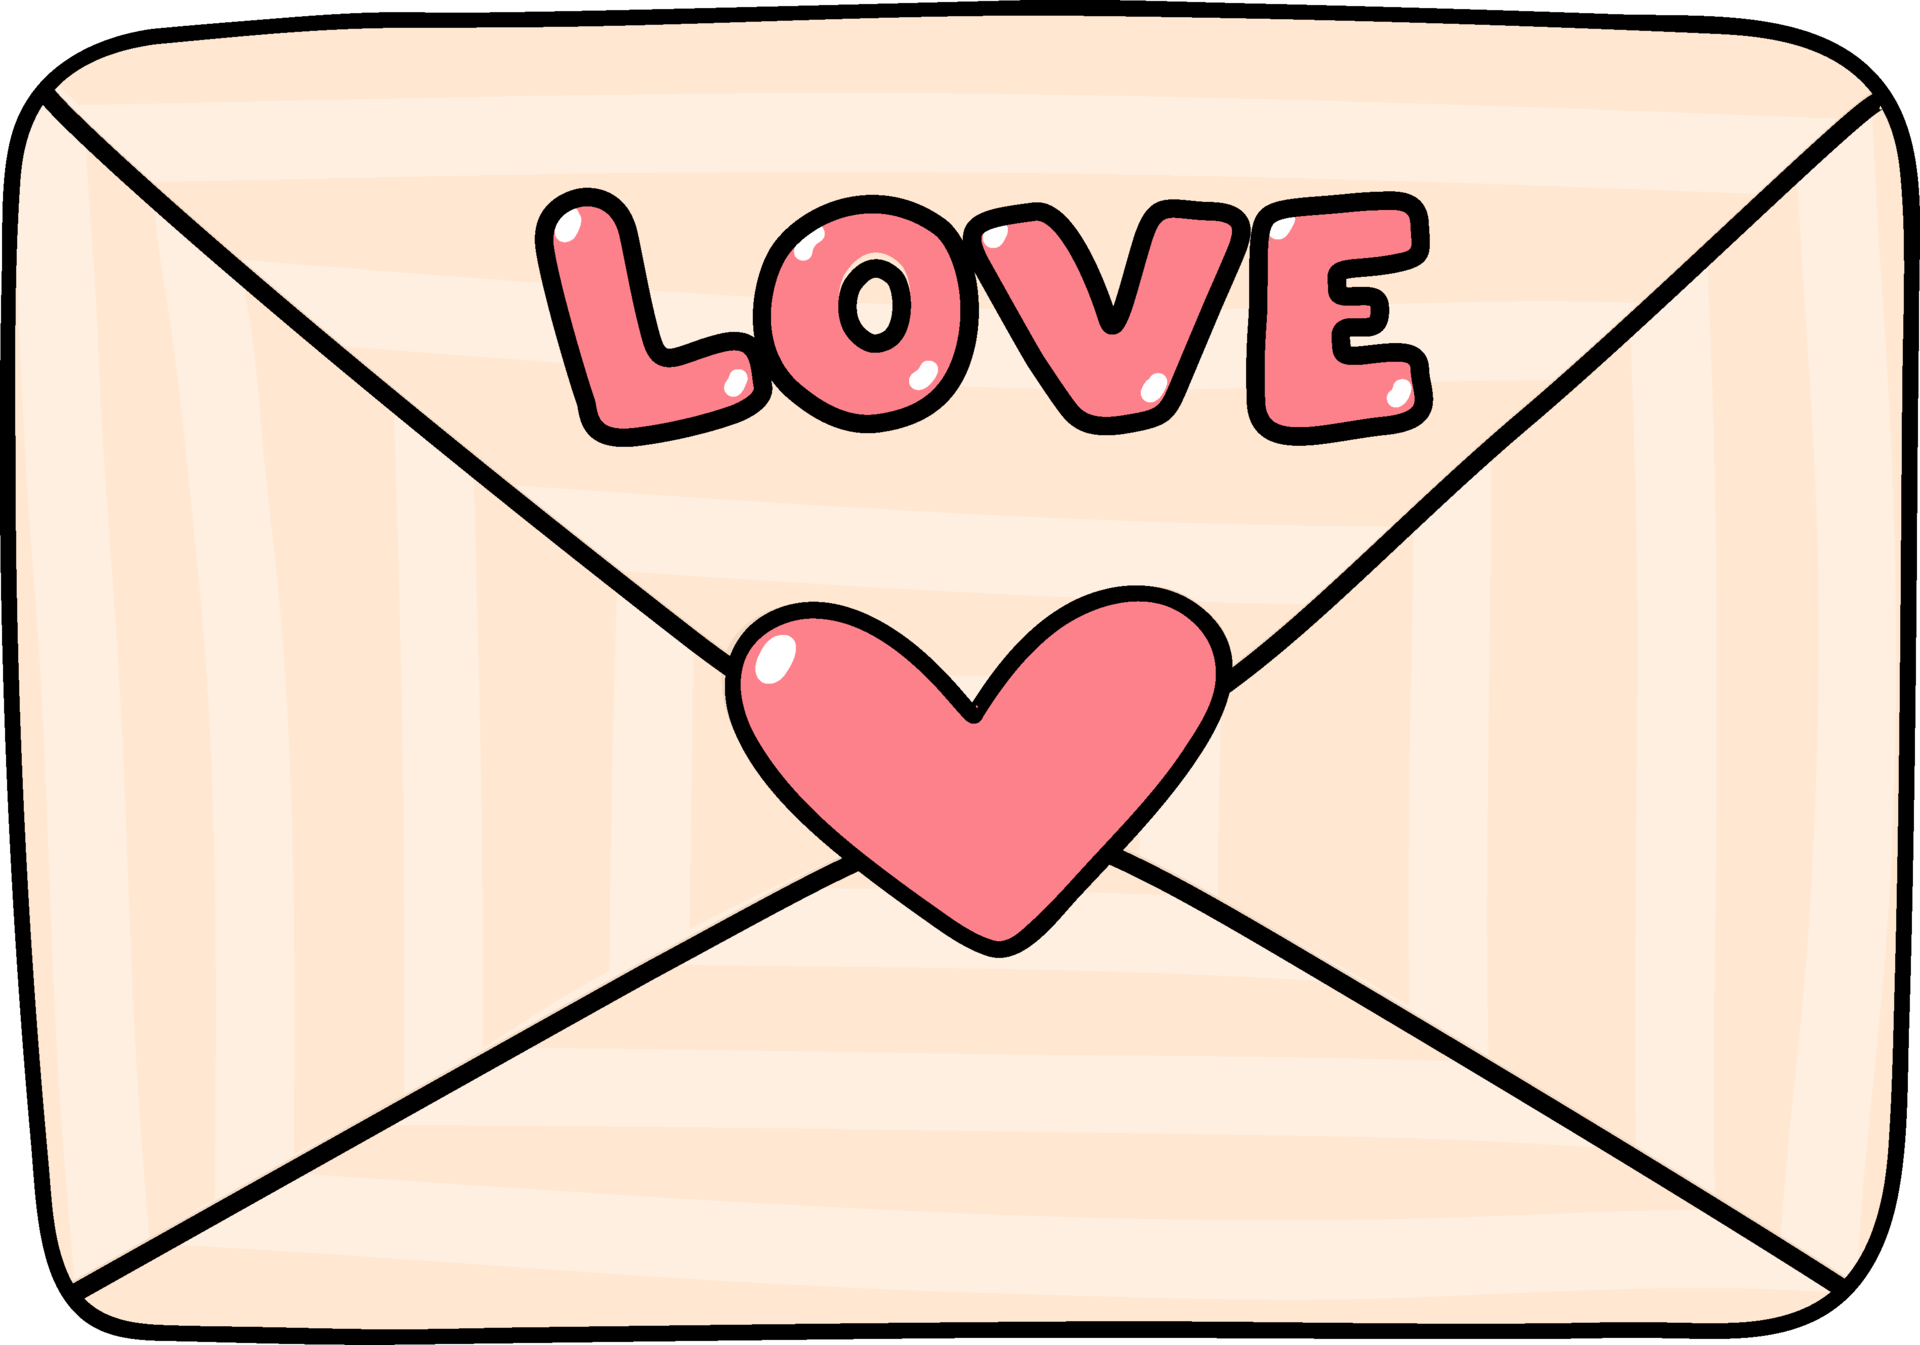 https://static.vecteezy.com/system/resources/previews/022/056/832/original/cute-sweet-love-letter-valentine-mail-cartoon-hand-drawing-png.png